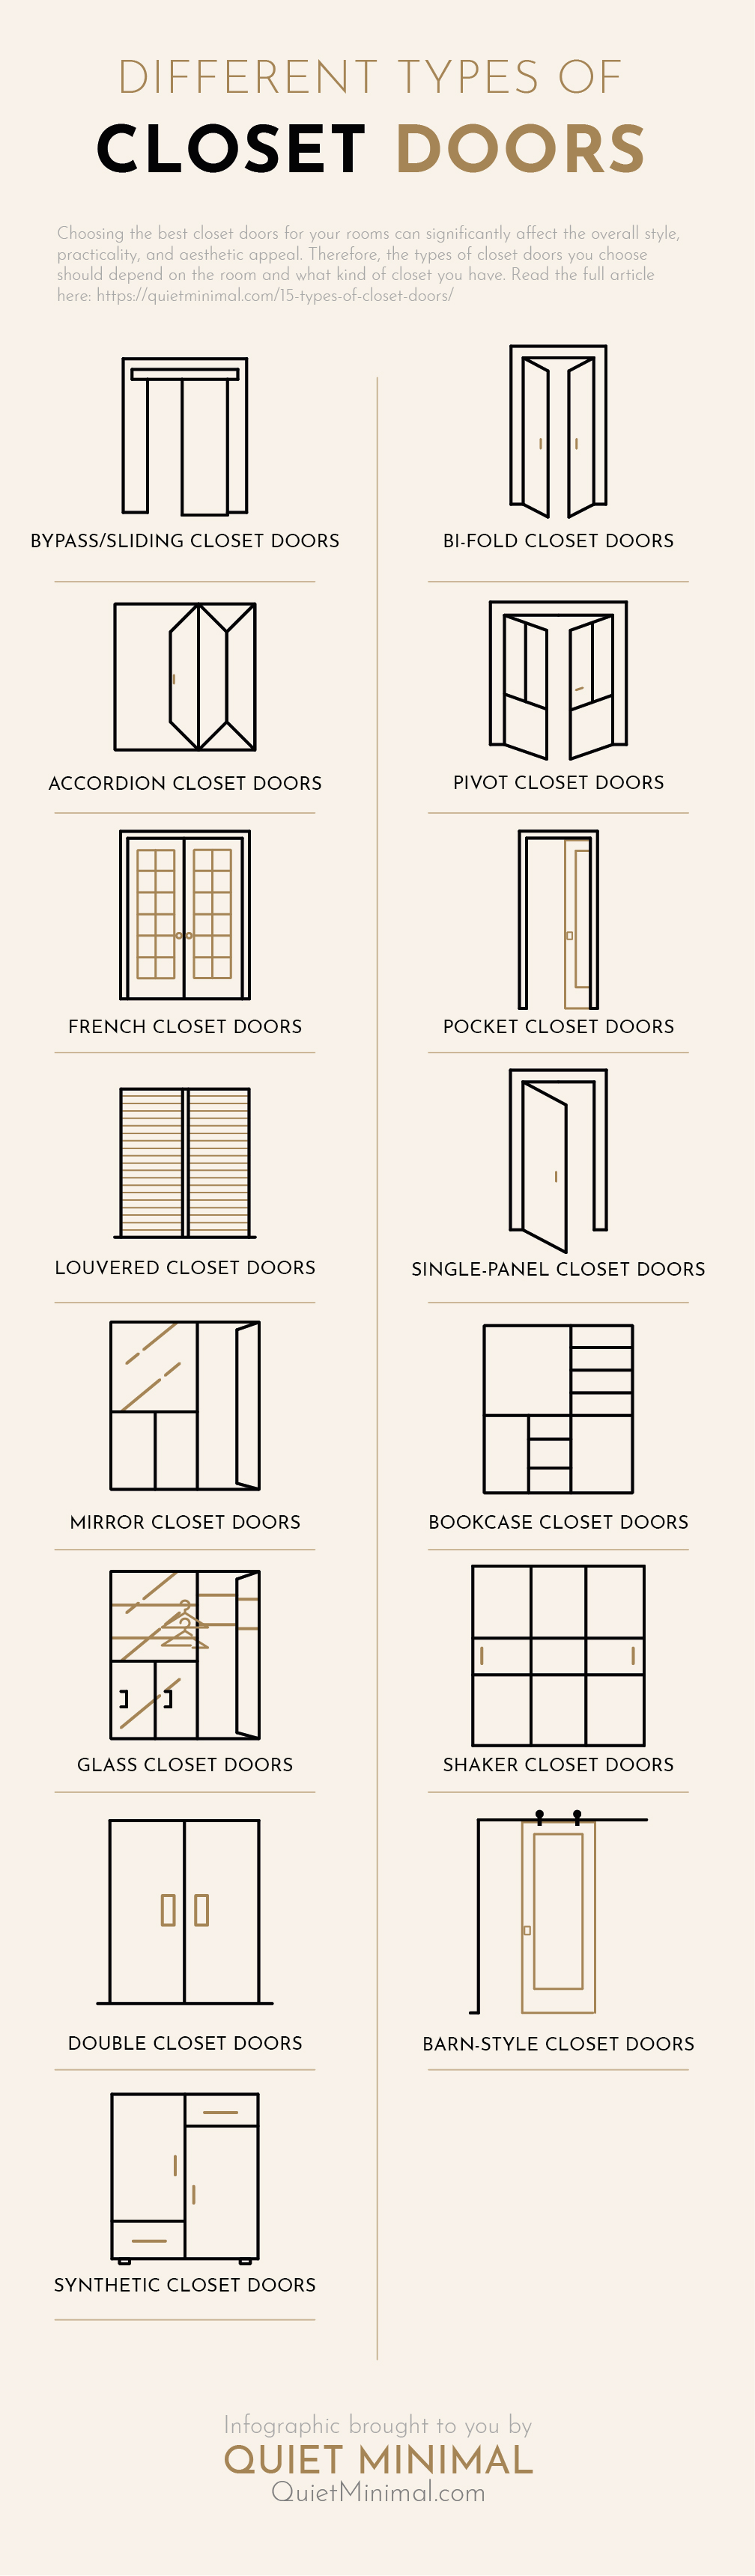 styles and types of closet doors